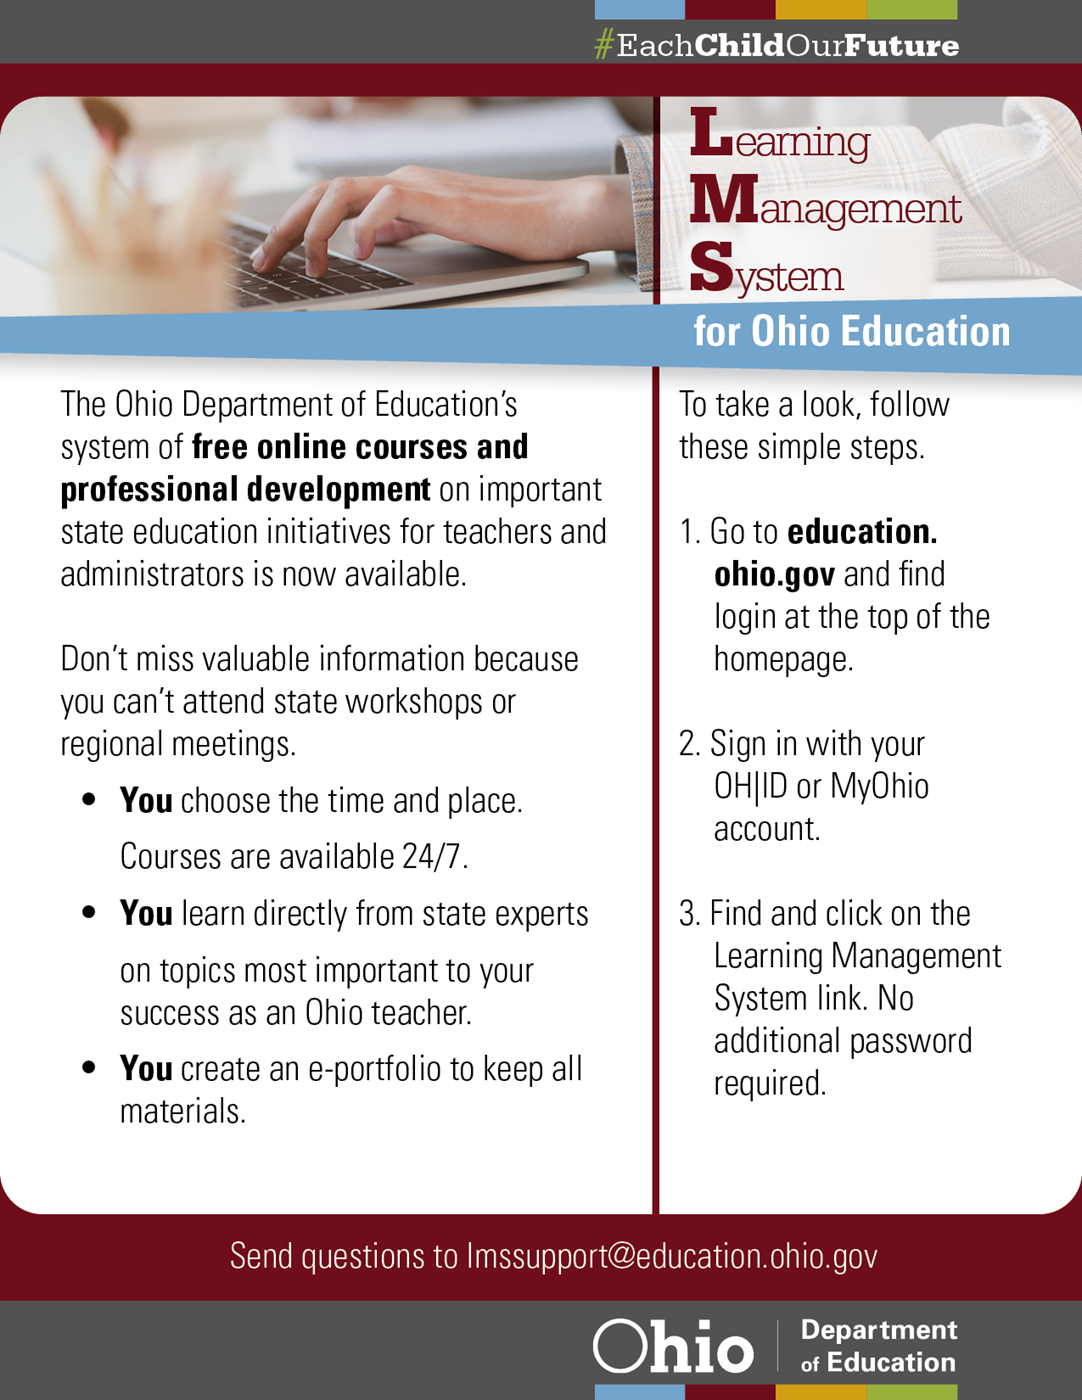 Informational card about the Learning Management System